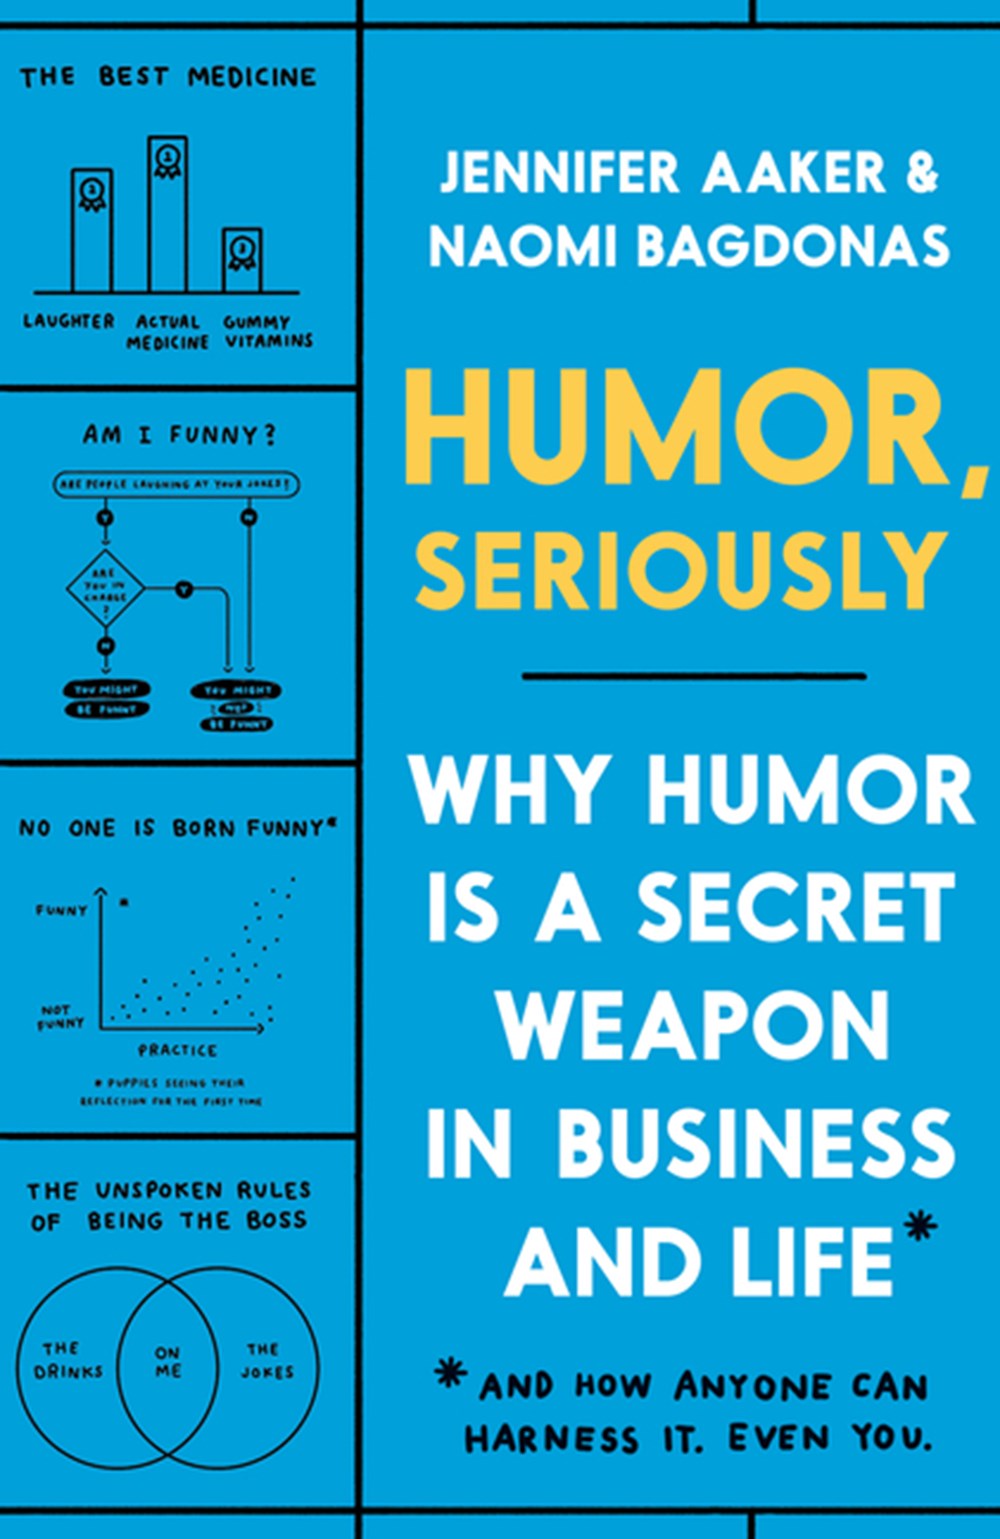 Humor, Seriously Why Humor Is a Secret Weapon in Business and Life*